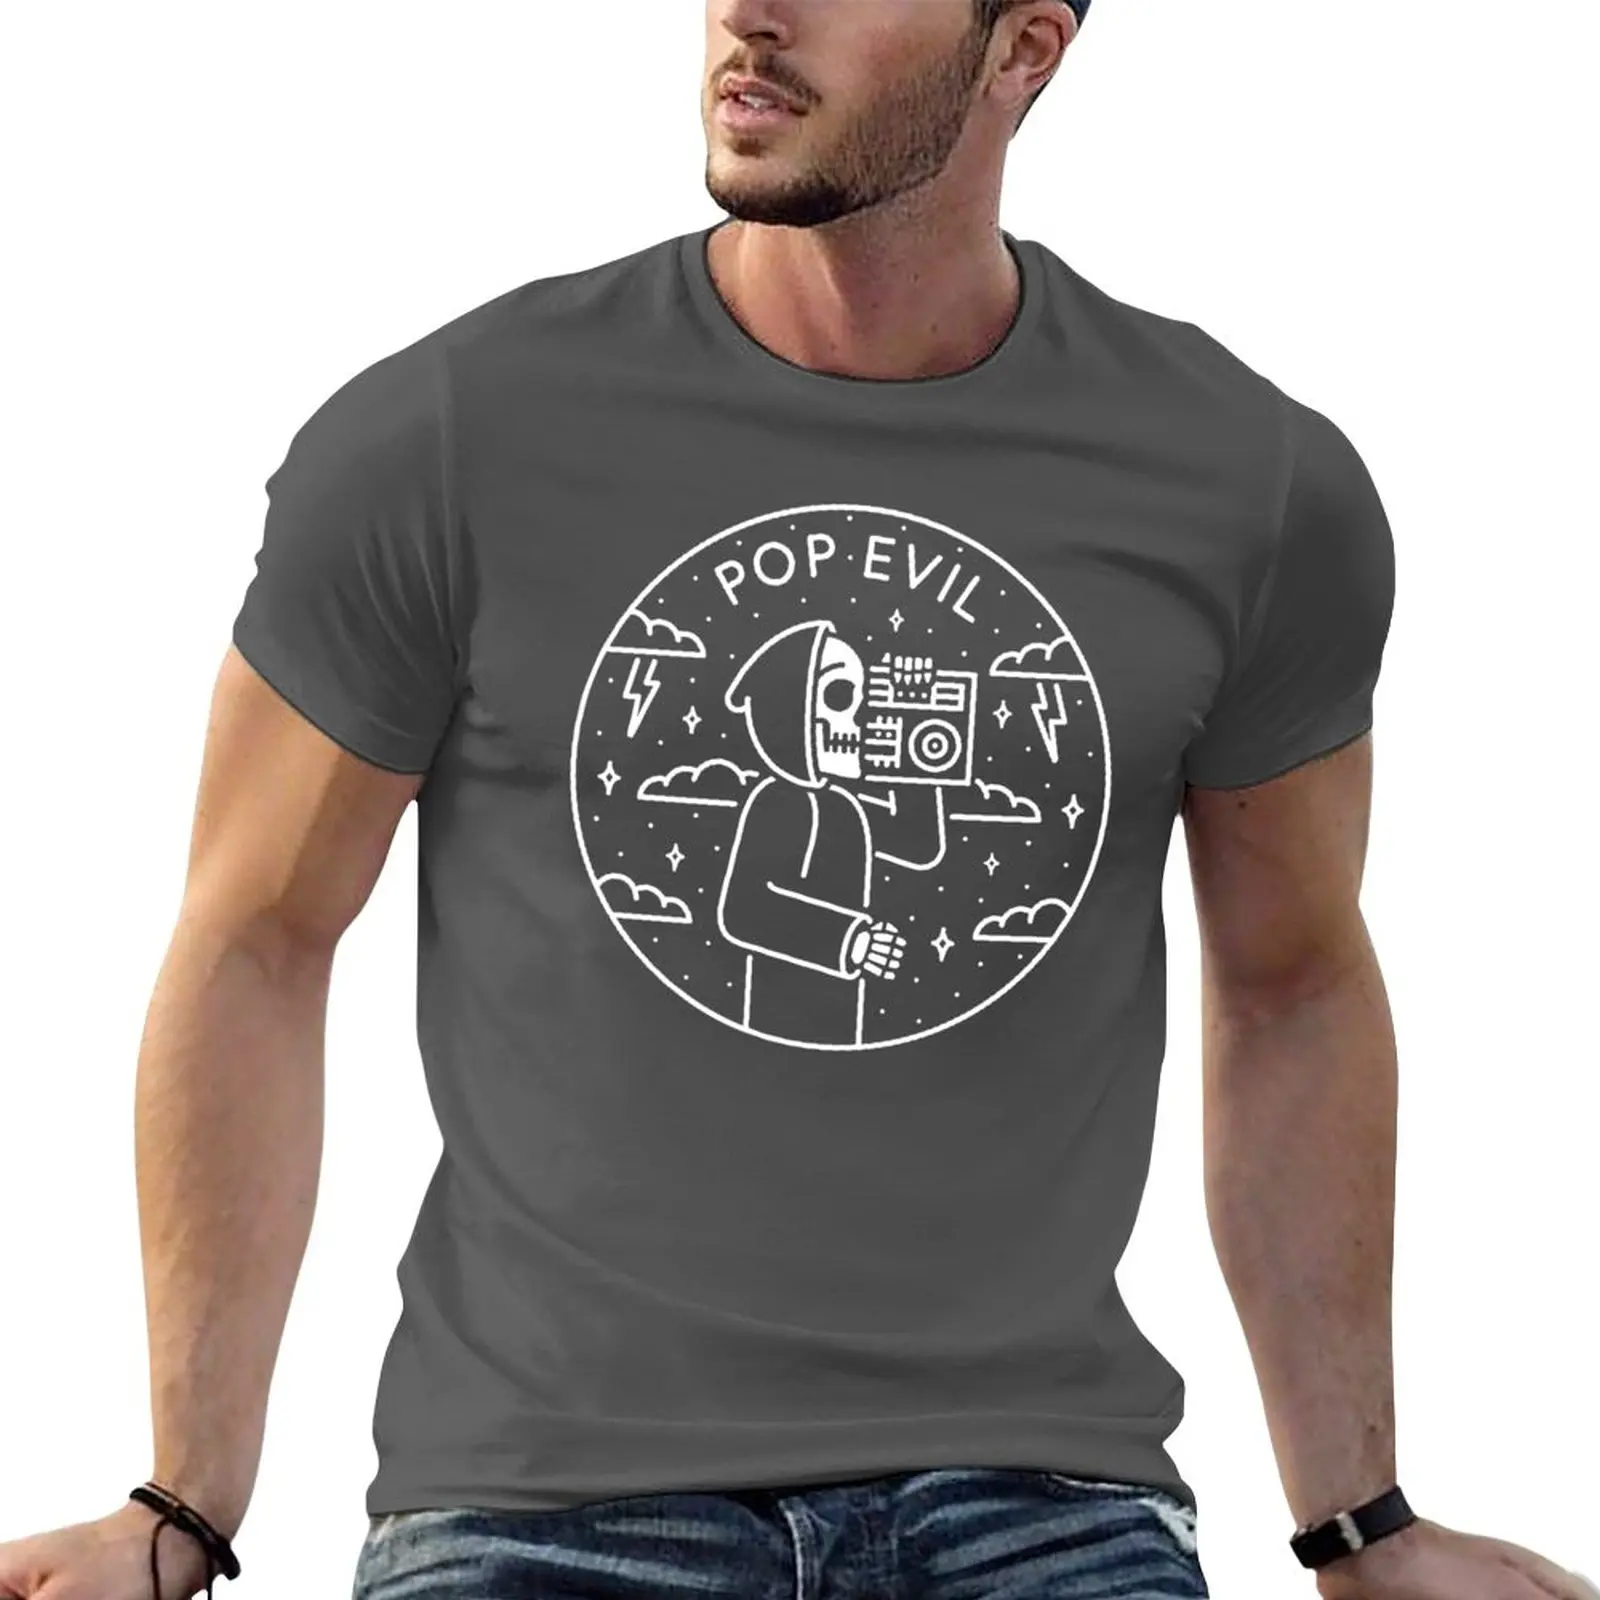 

New Tigapo Pop Show american Tour 2019 T-Shirt black t shirts anime clothes mens graphic t-shirts big and tall